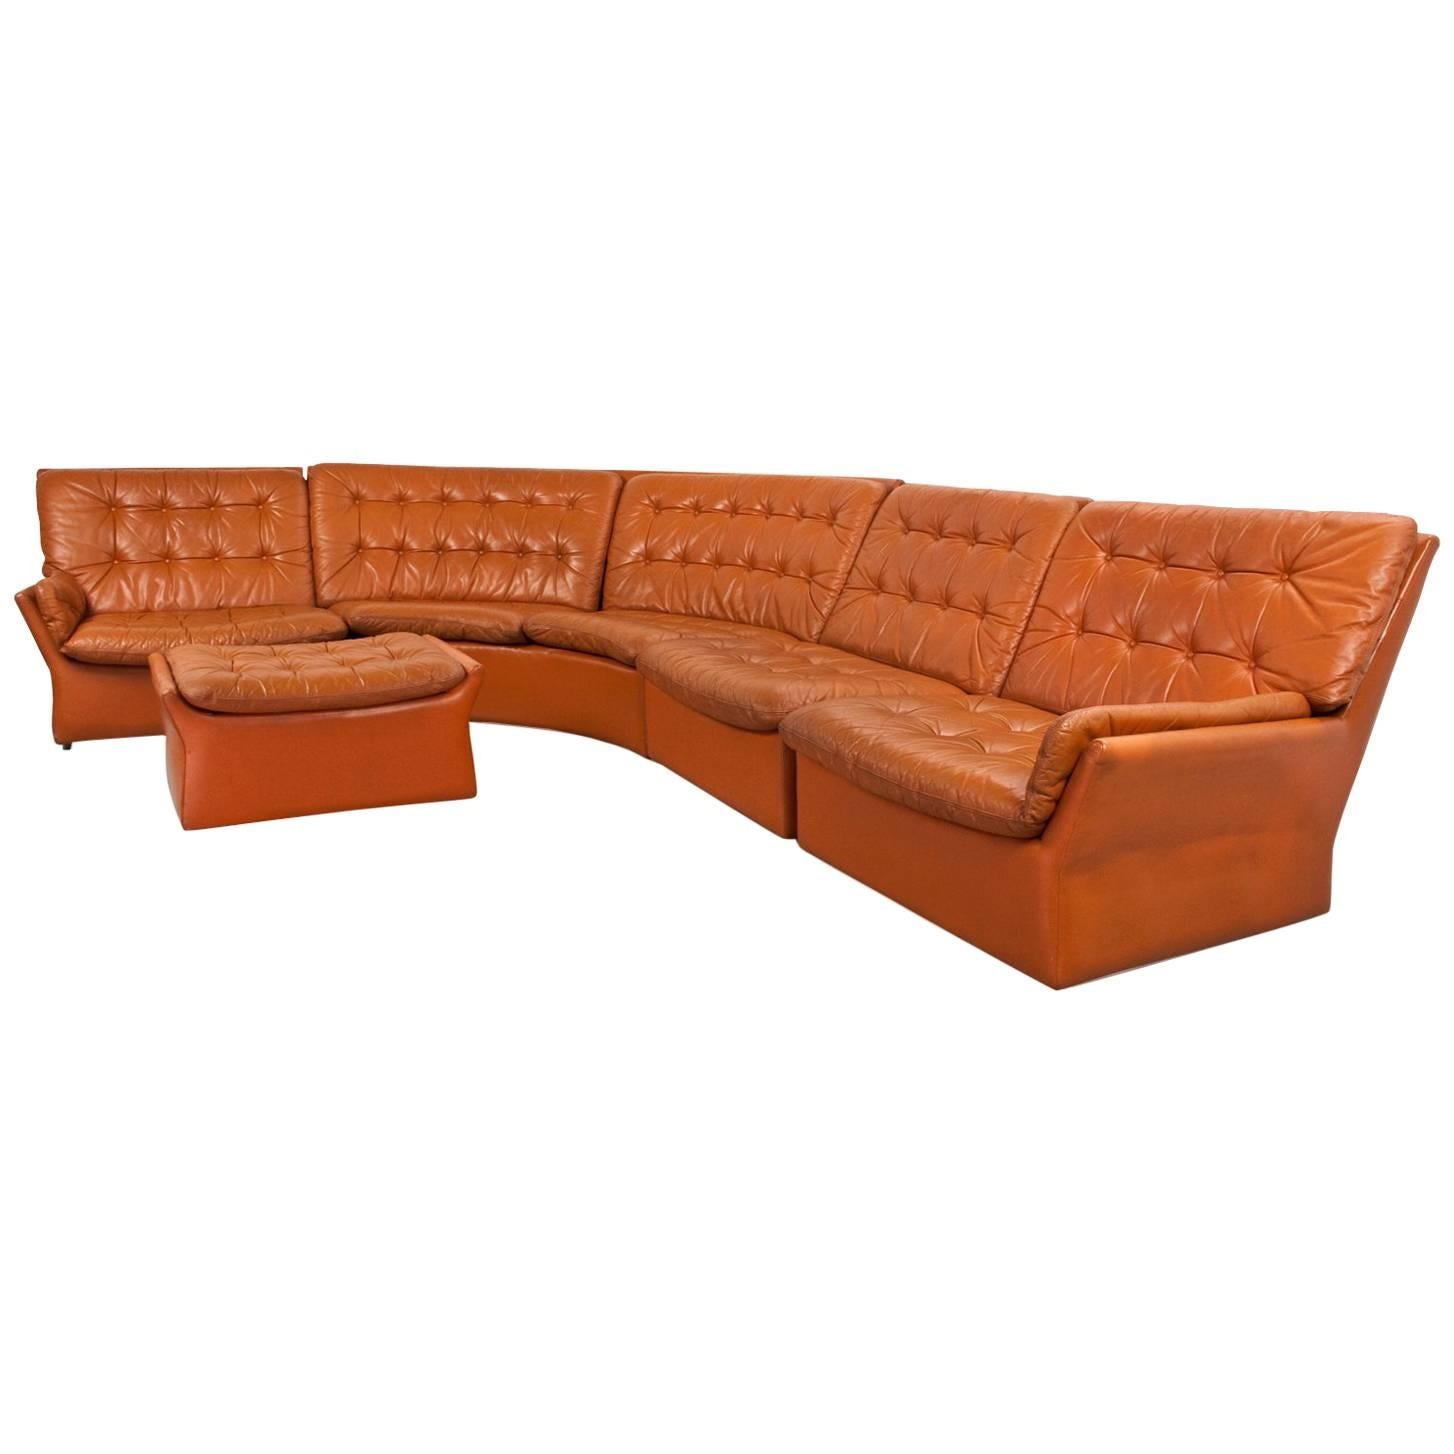 Leather Curved Sectional Sofa Mid-Century Modern, 1970s Dutch Design